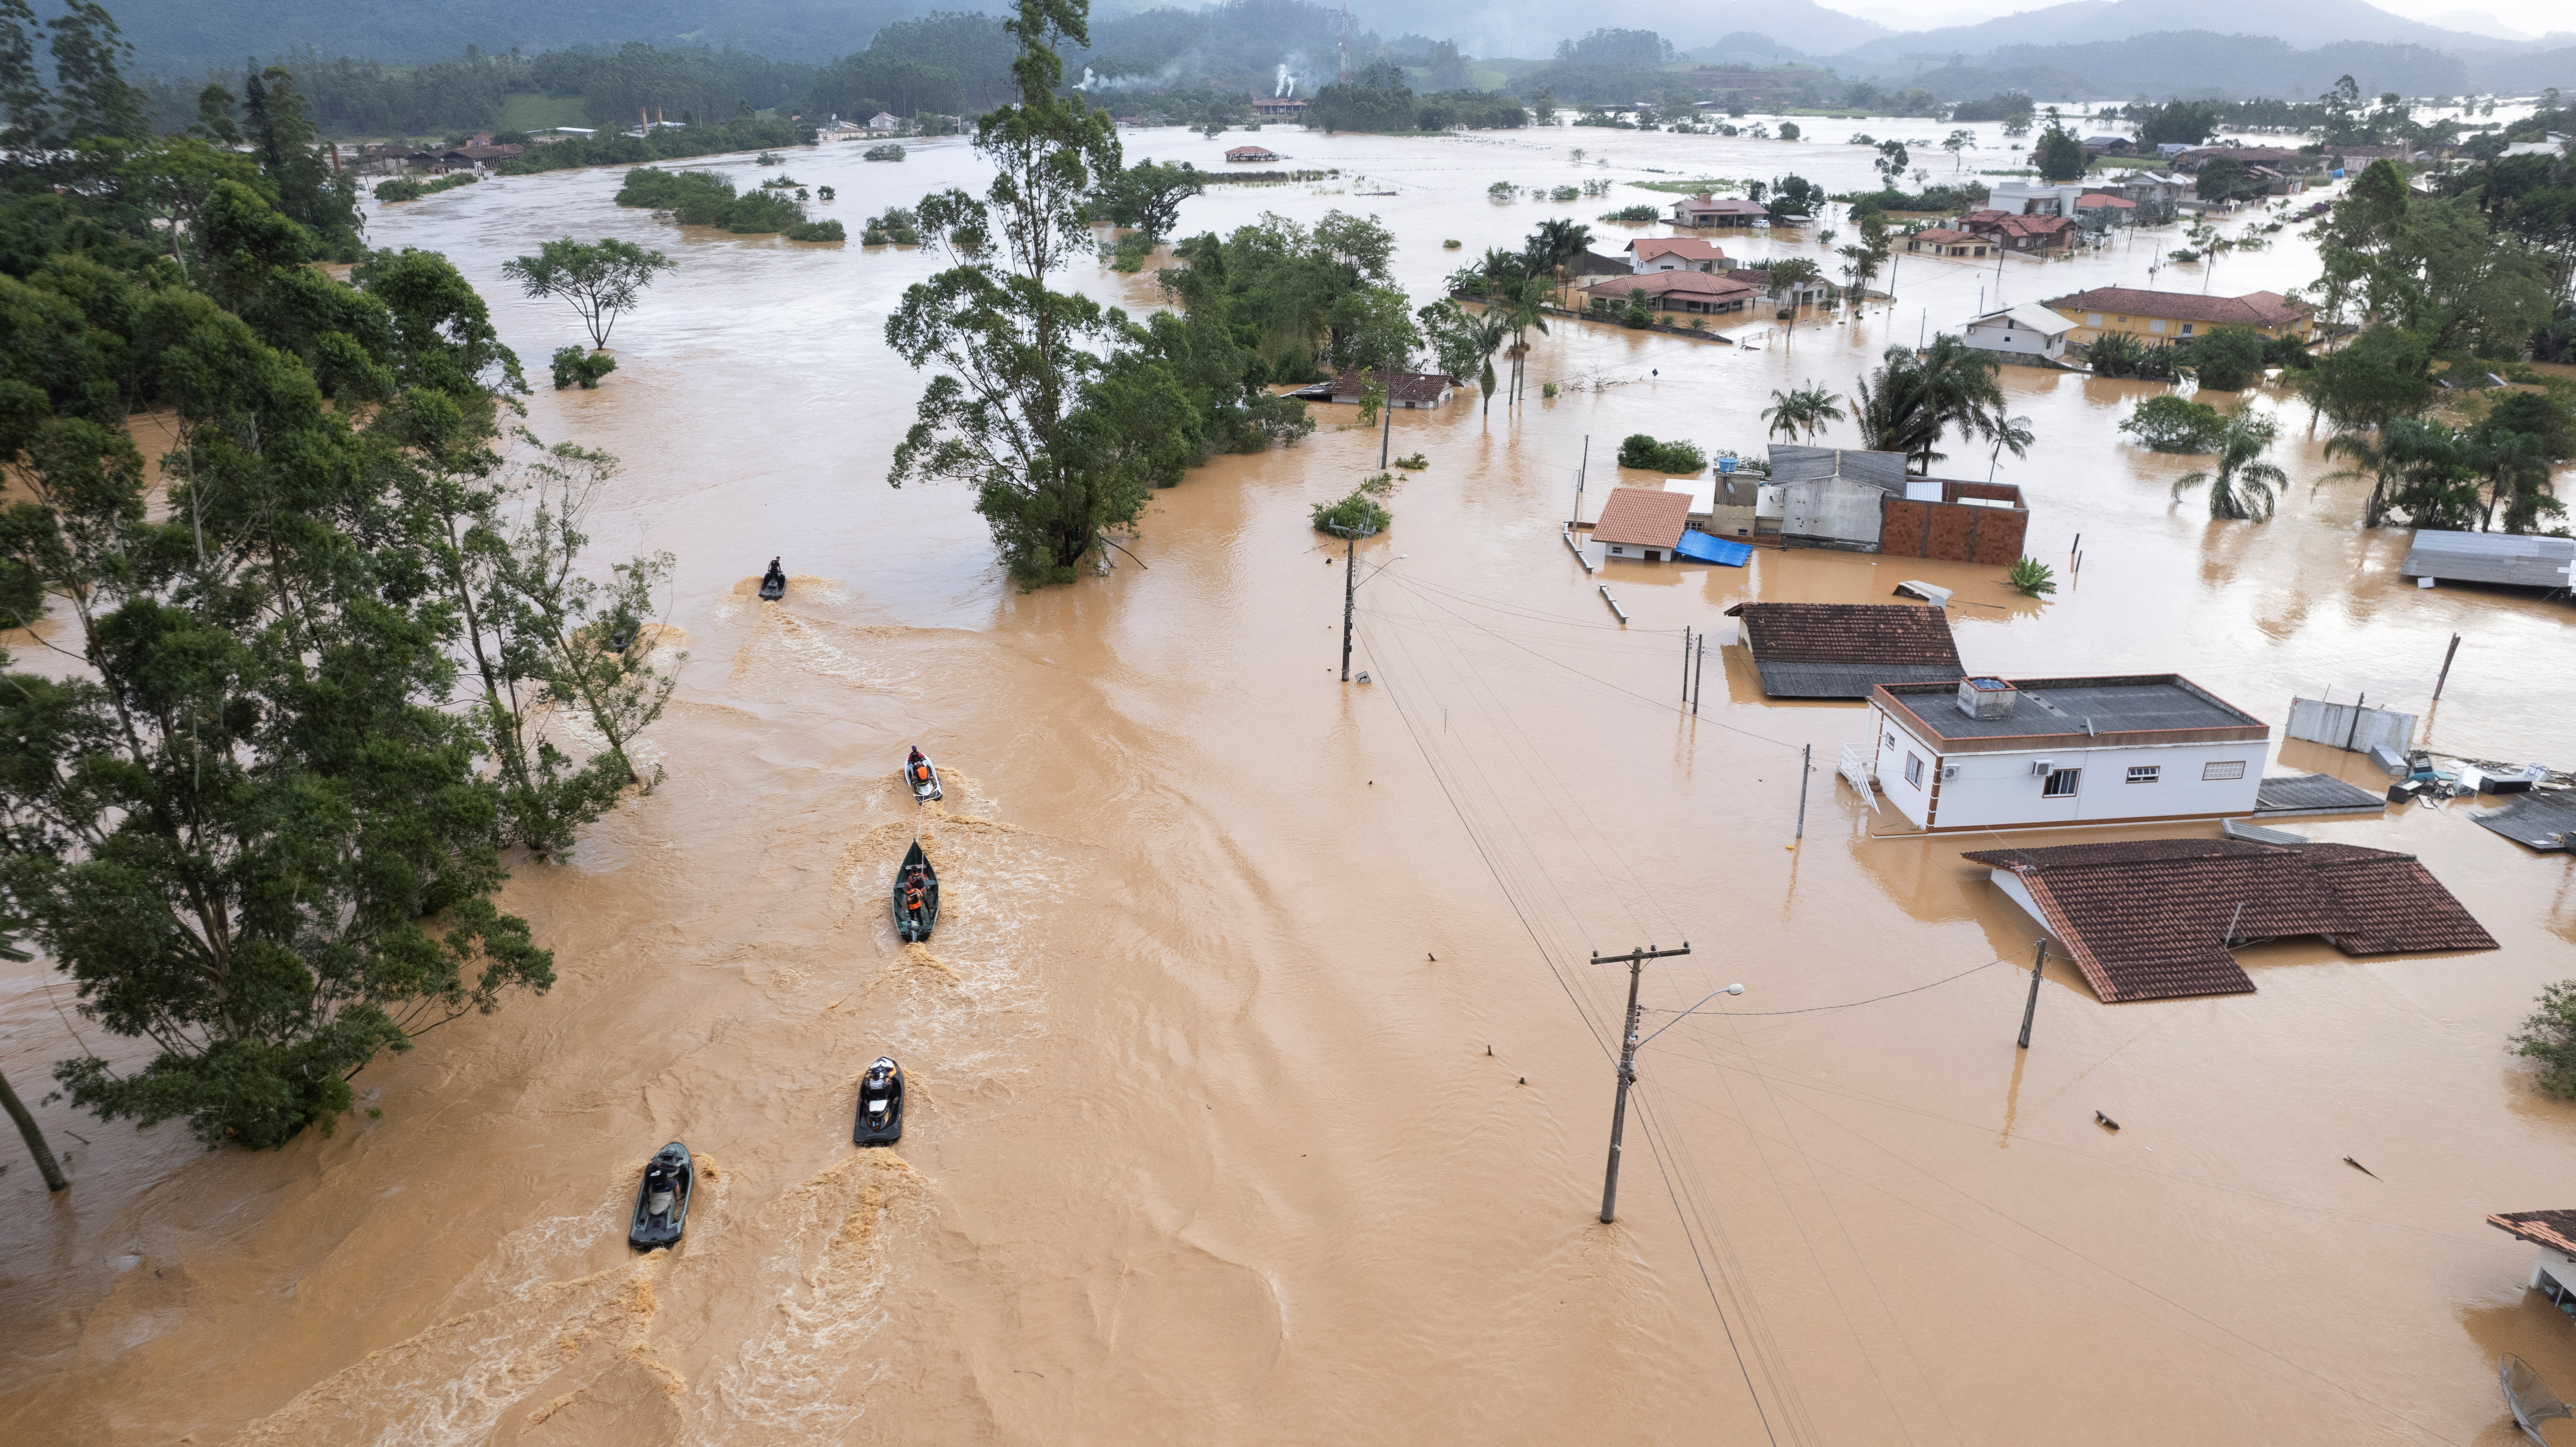 Volunteers search for residents after heavy rains in Santa Catarina